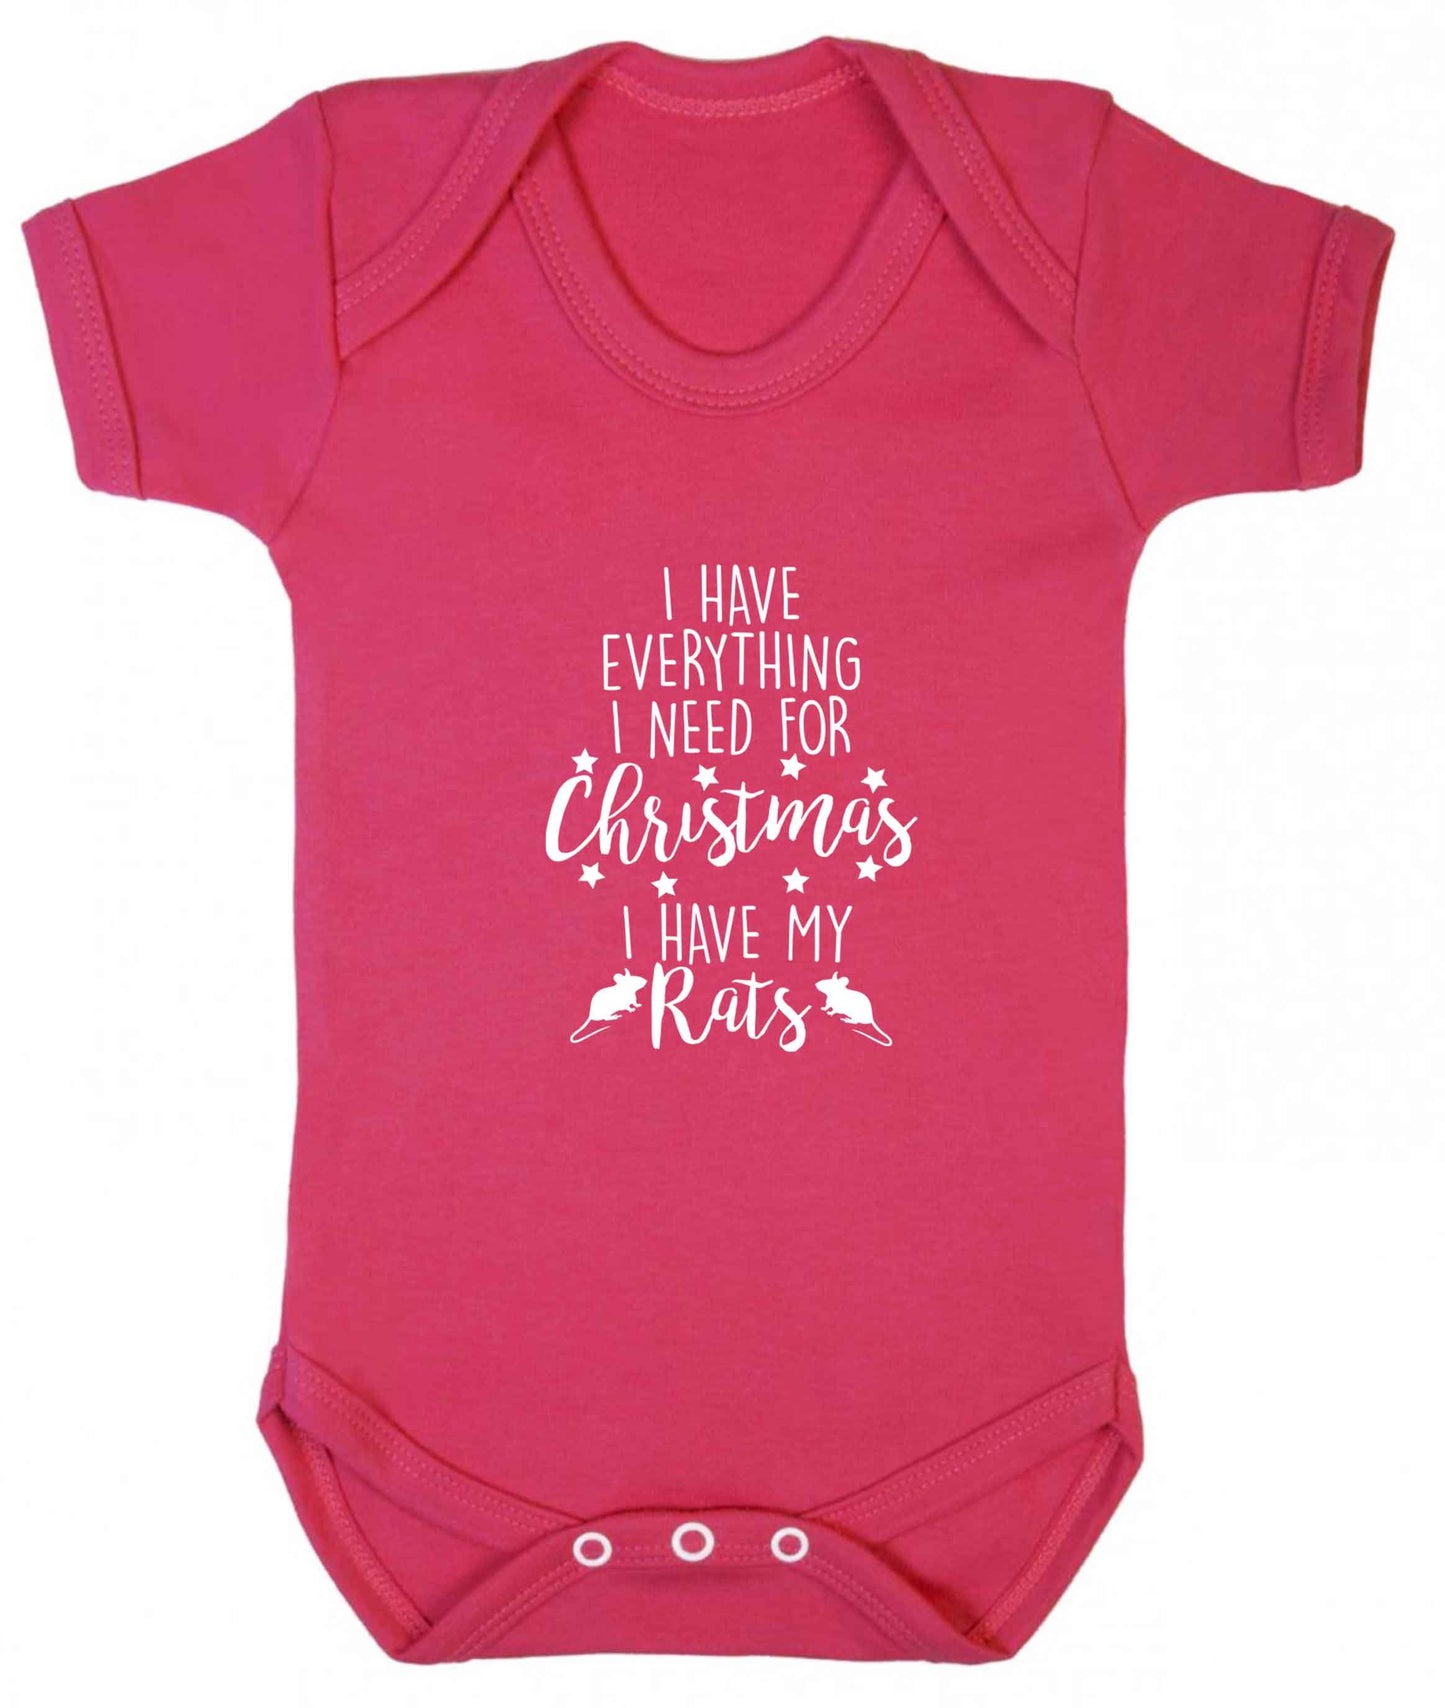 I have everything I need for Christmas I have my rats baby vest dark pink 18-24 months